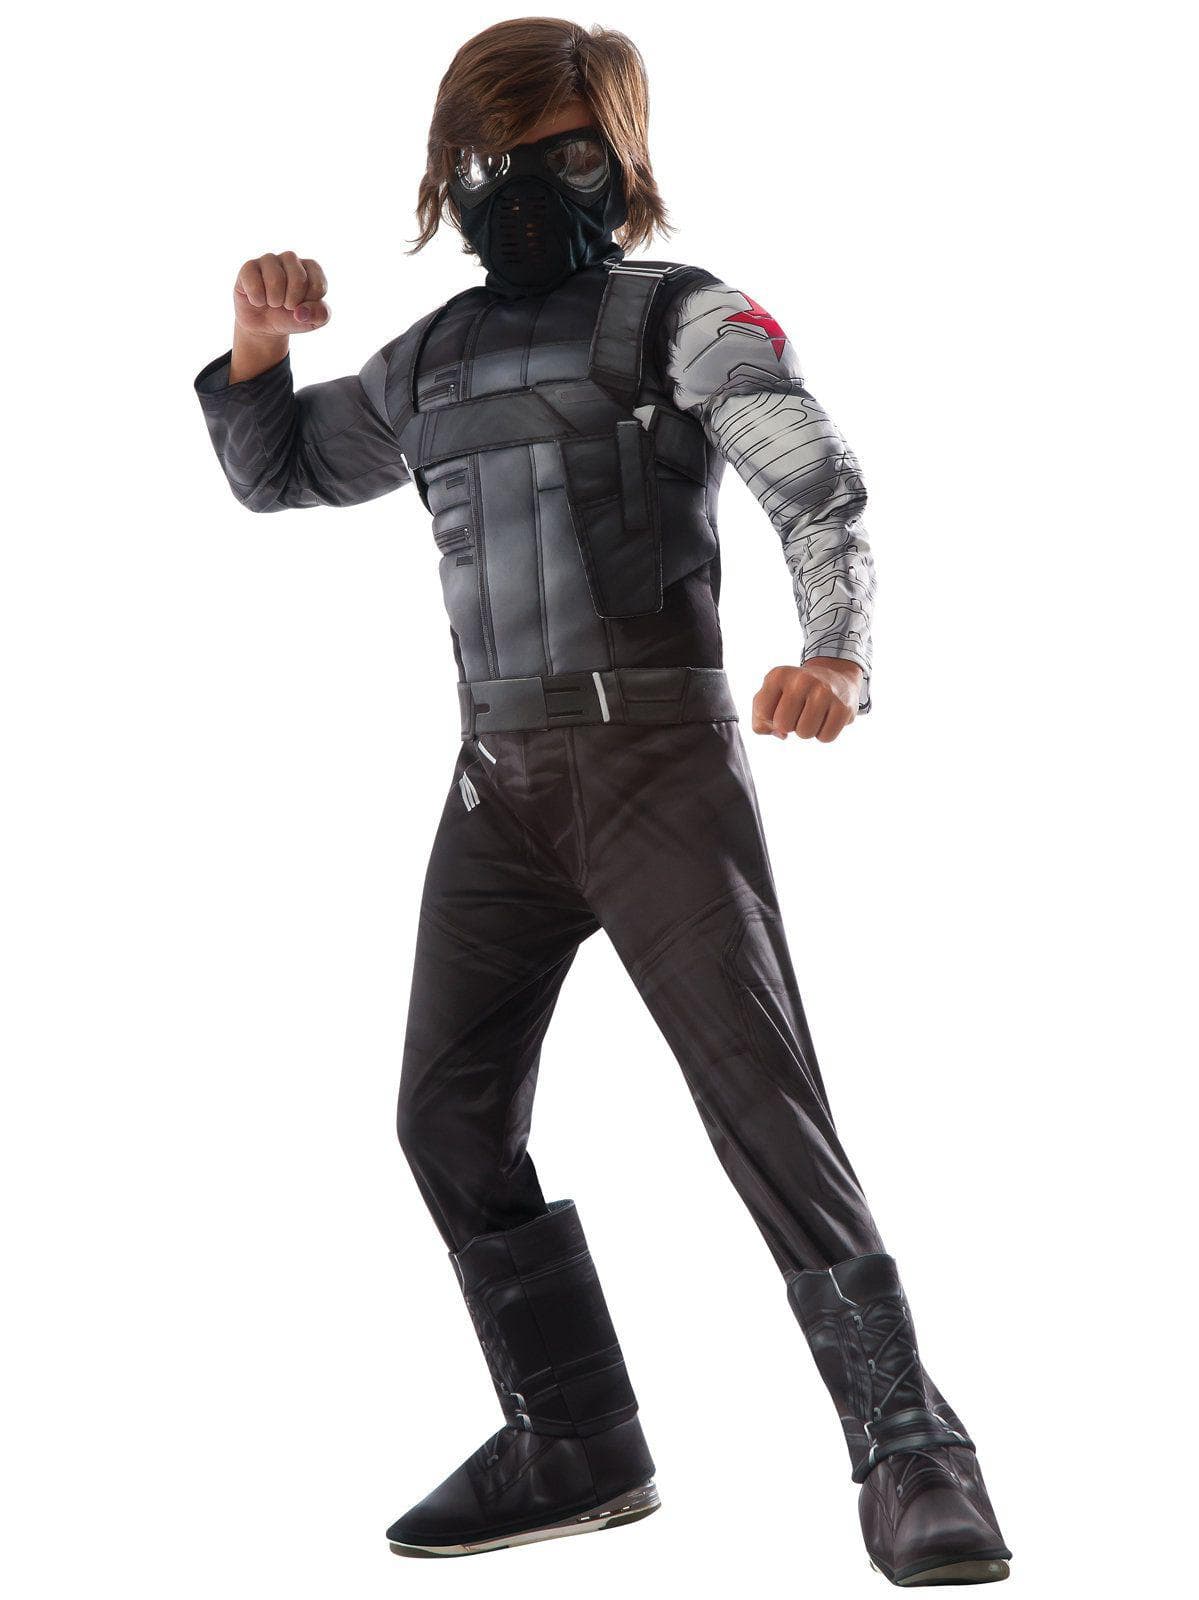 Kid's Avengers Winter Soldier Deluxe Muscle Chest Costume - costumes.com